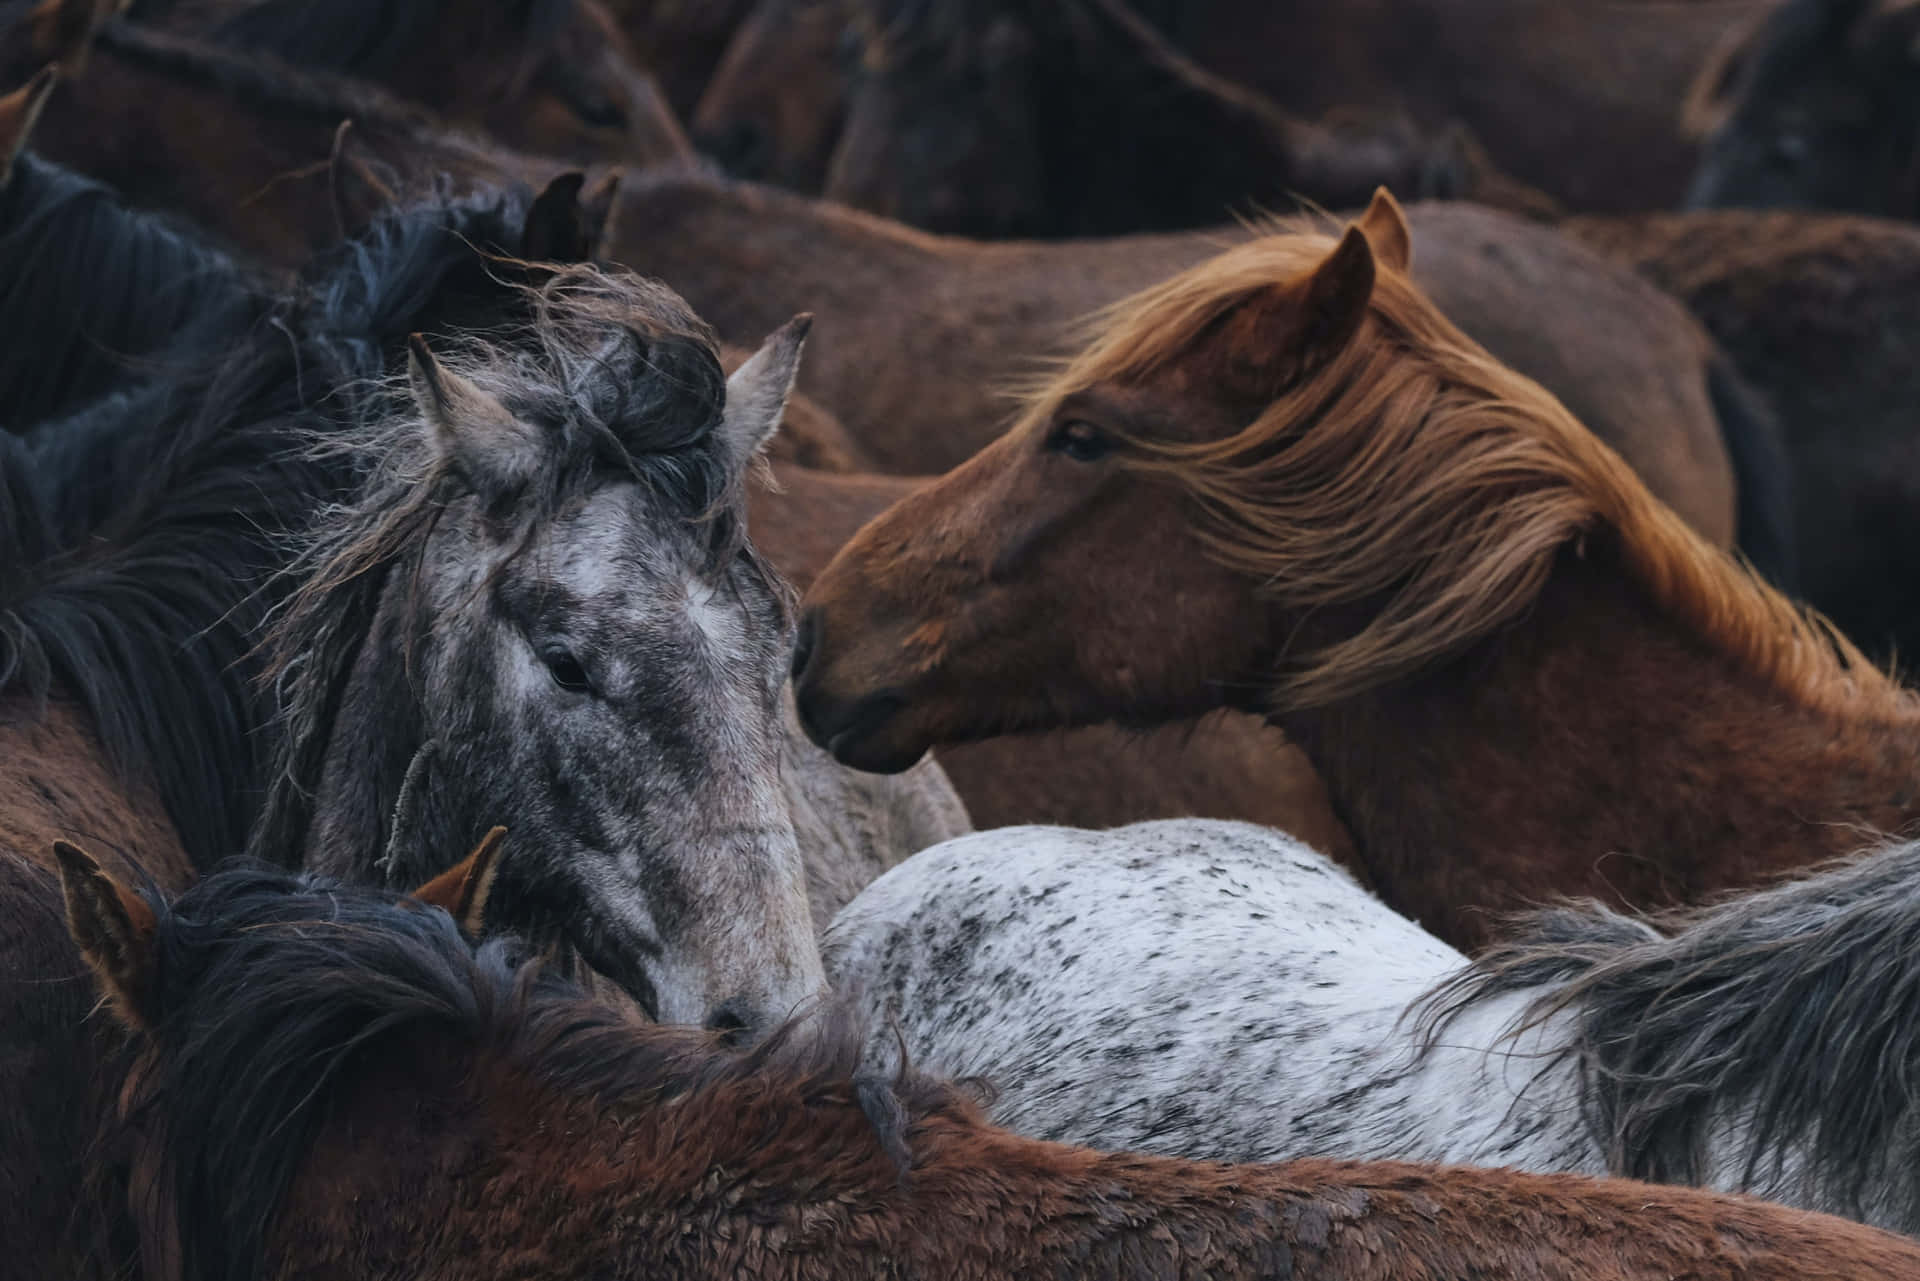 "Vibrant, Majestic, and Free: The Beauty of Horses"